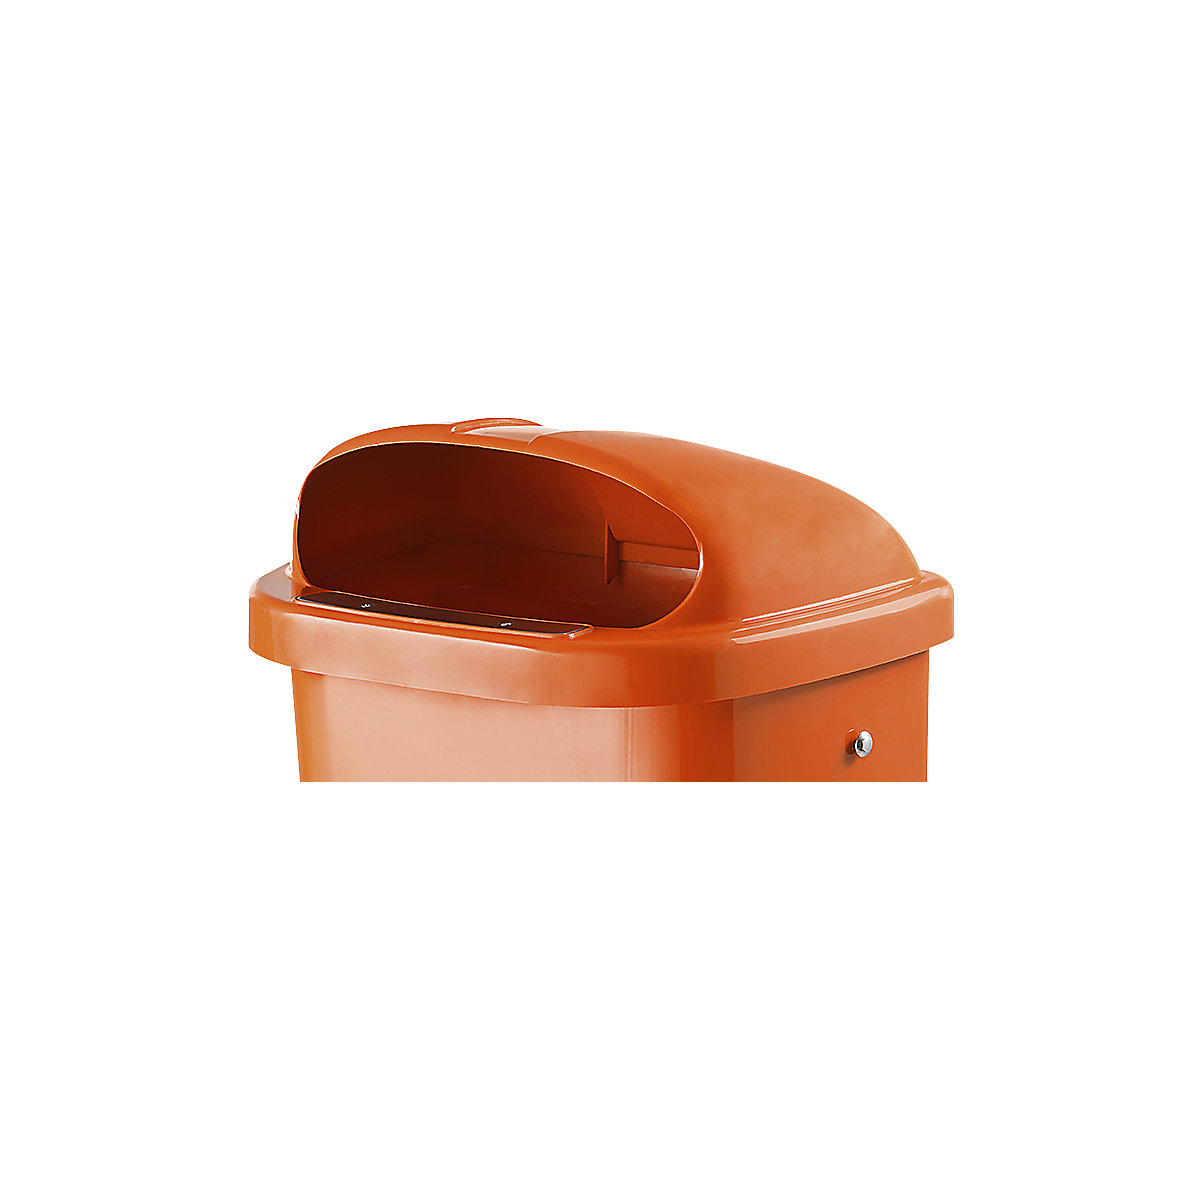 Replacement lid for DIN waste paper bin